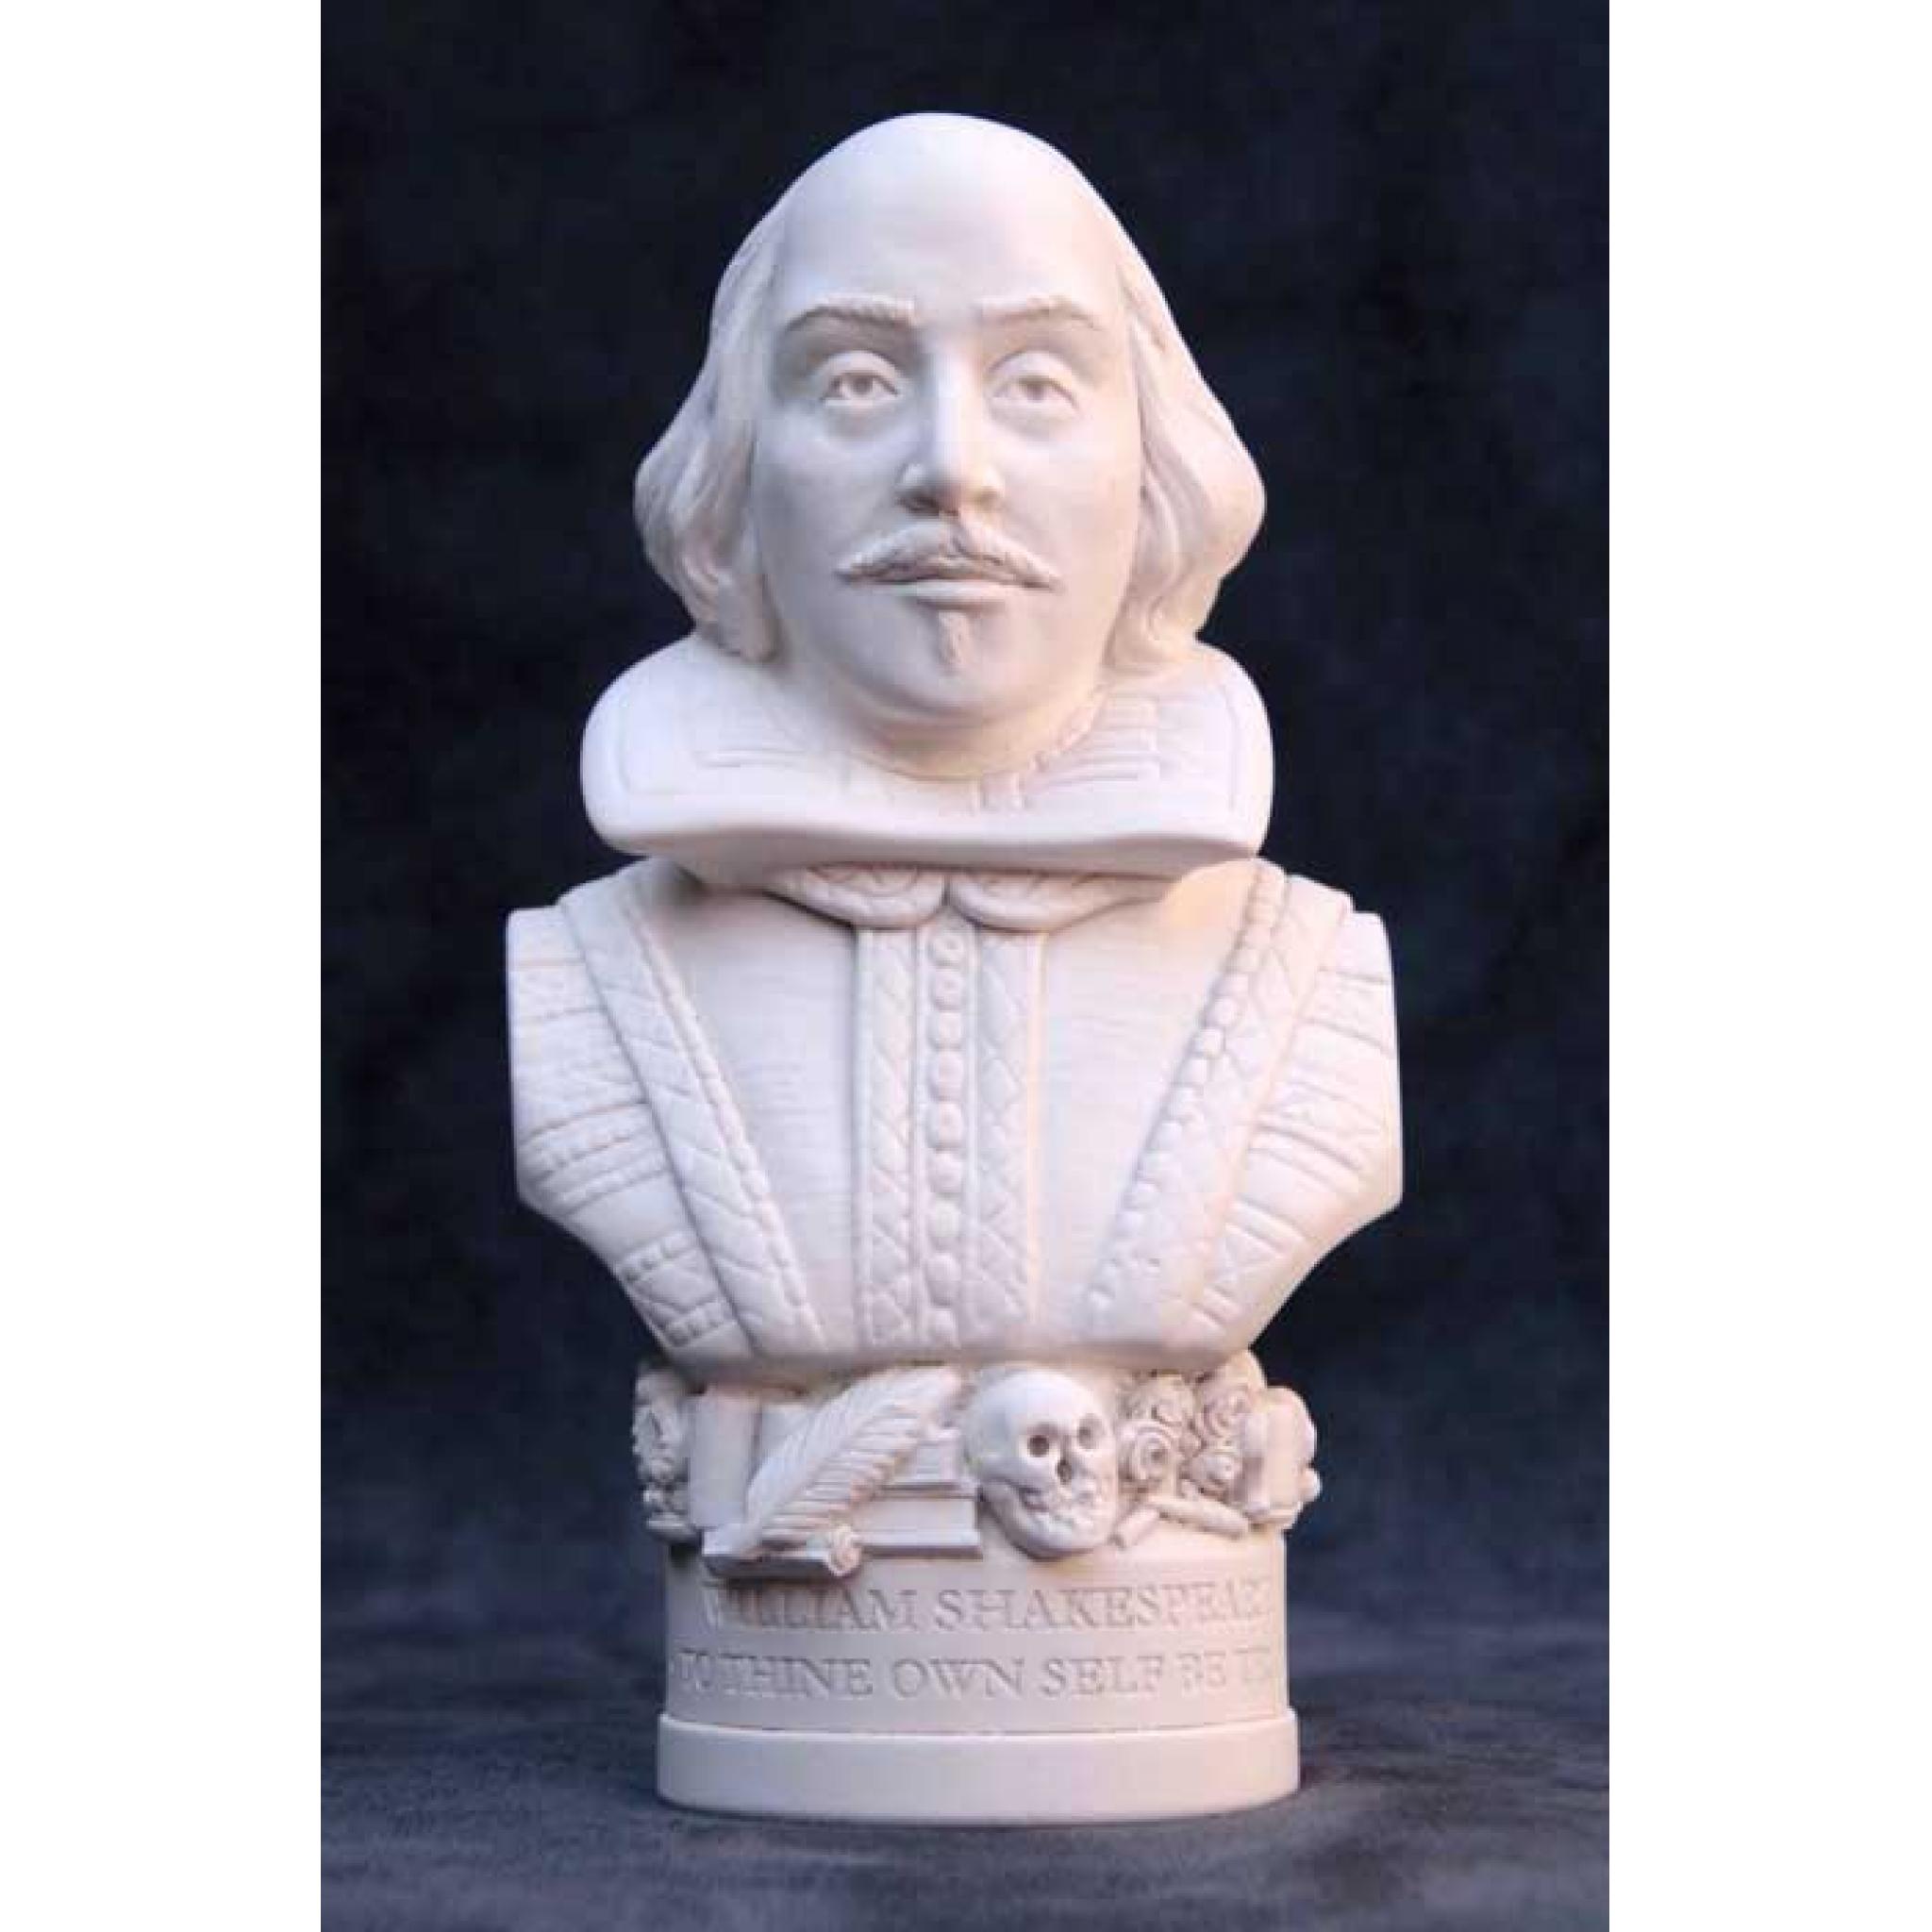 dianond select shakespeare bust coin bank